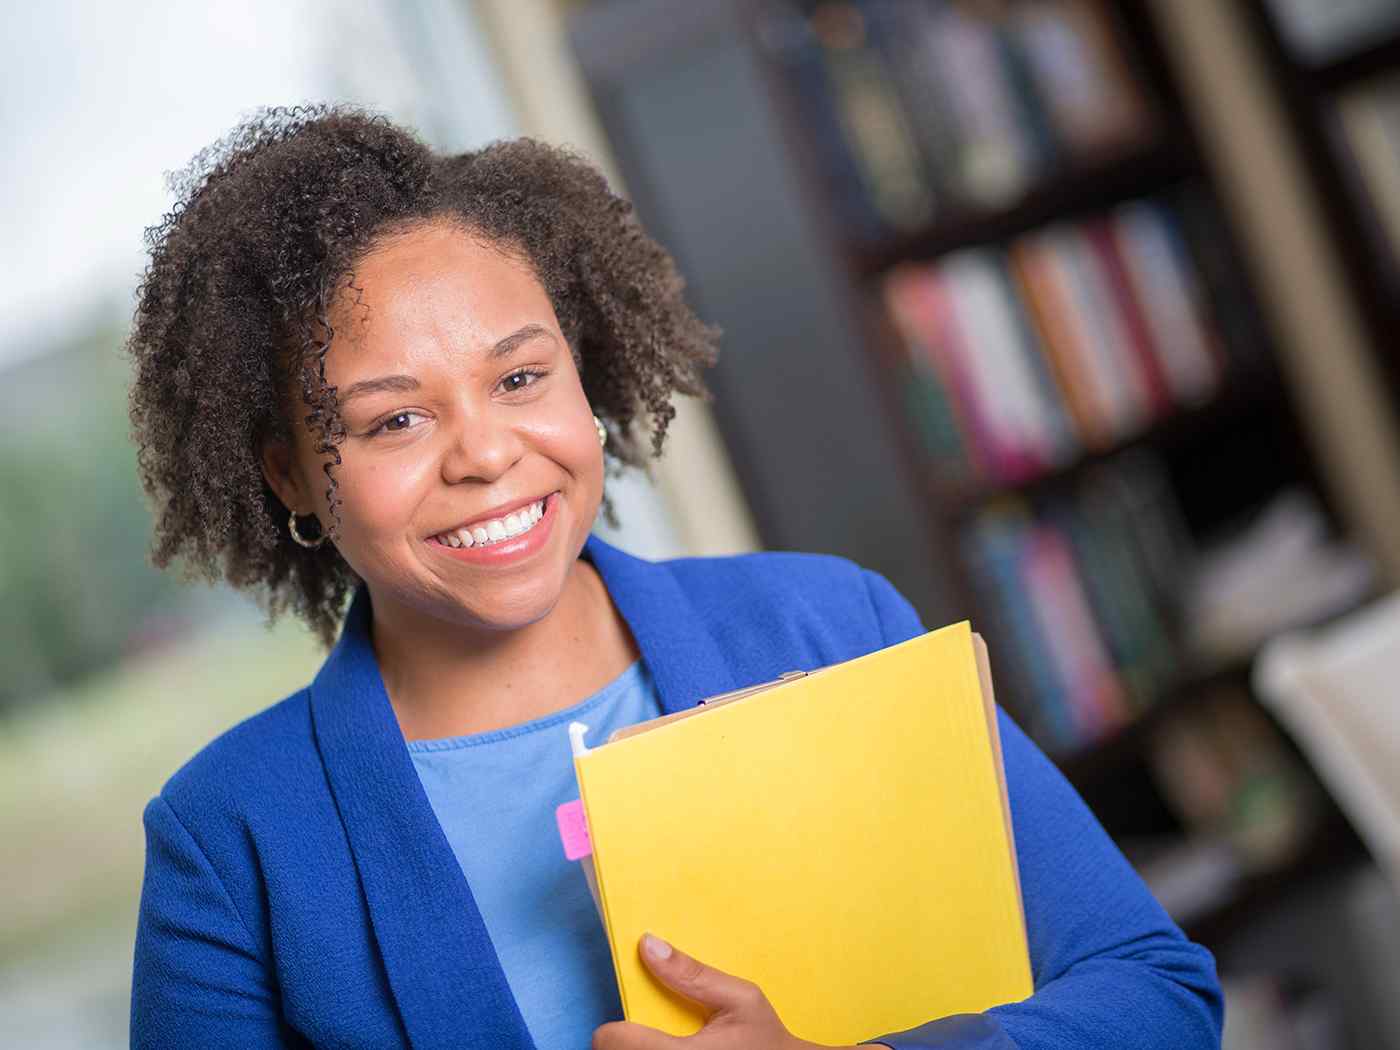 Female business student holding personnel files